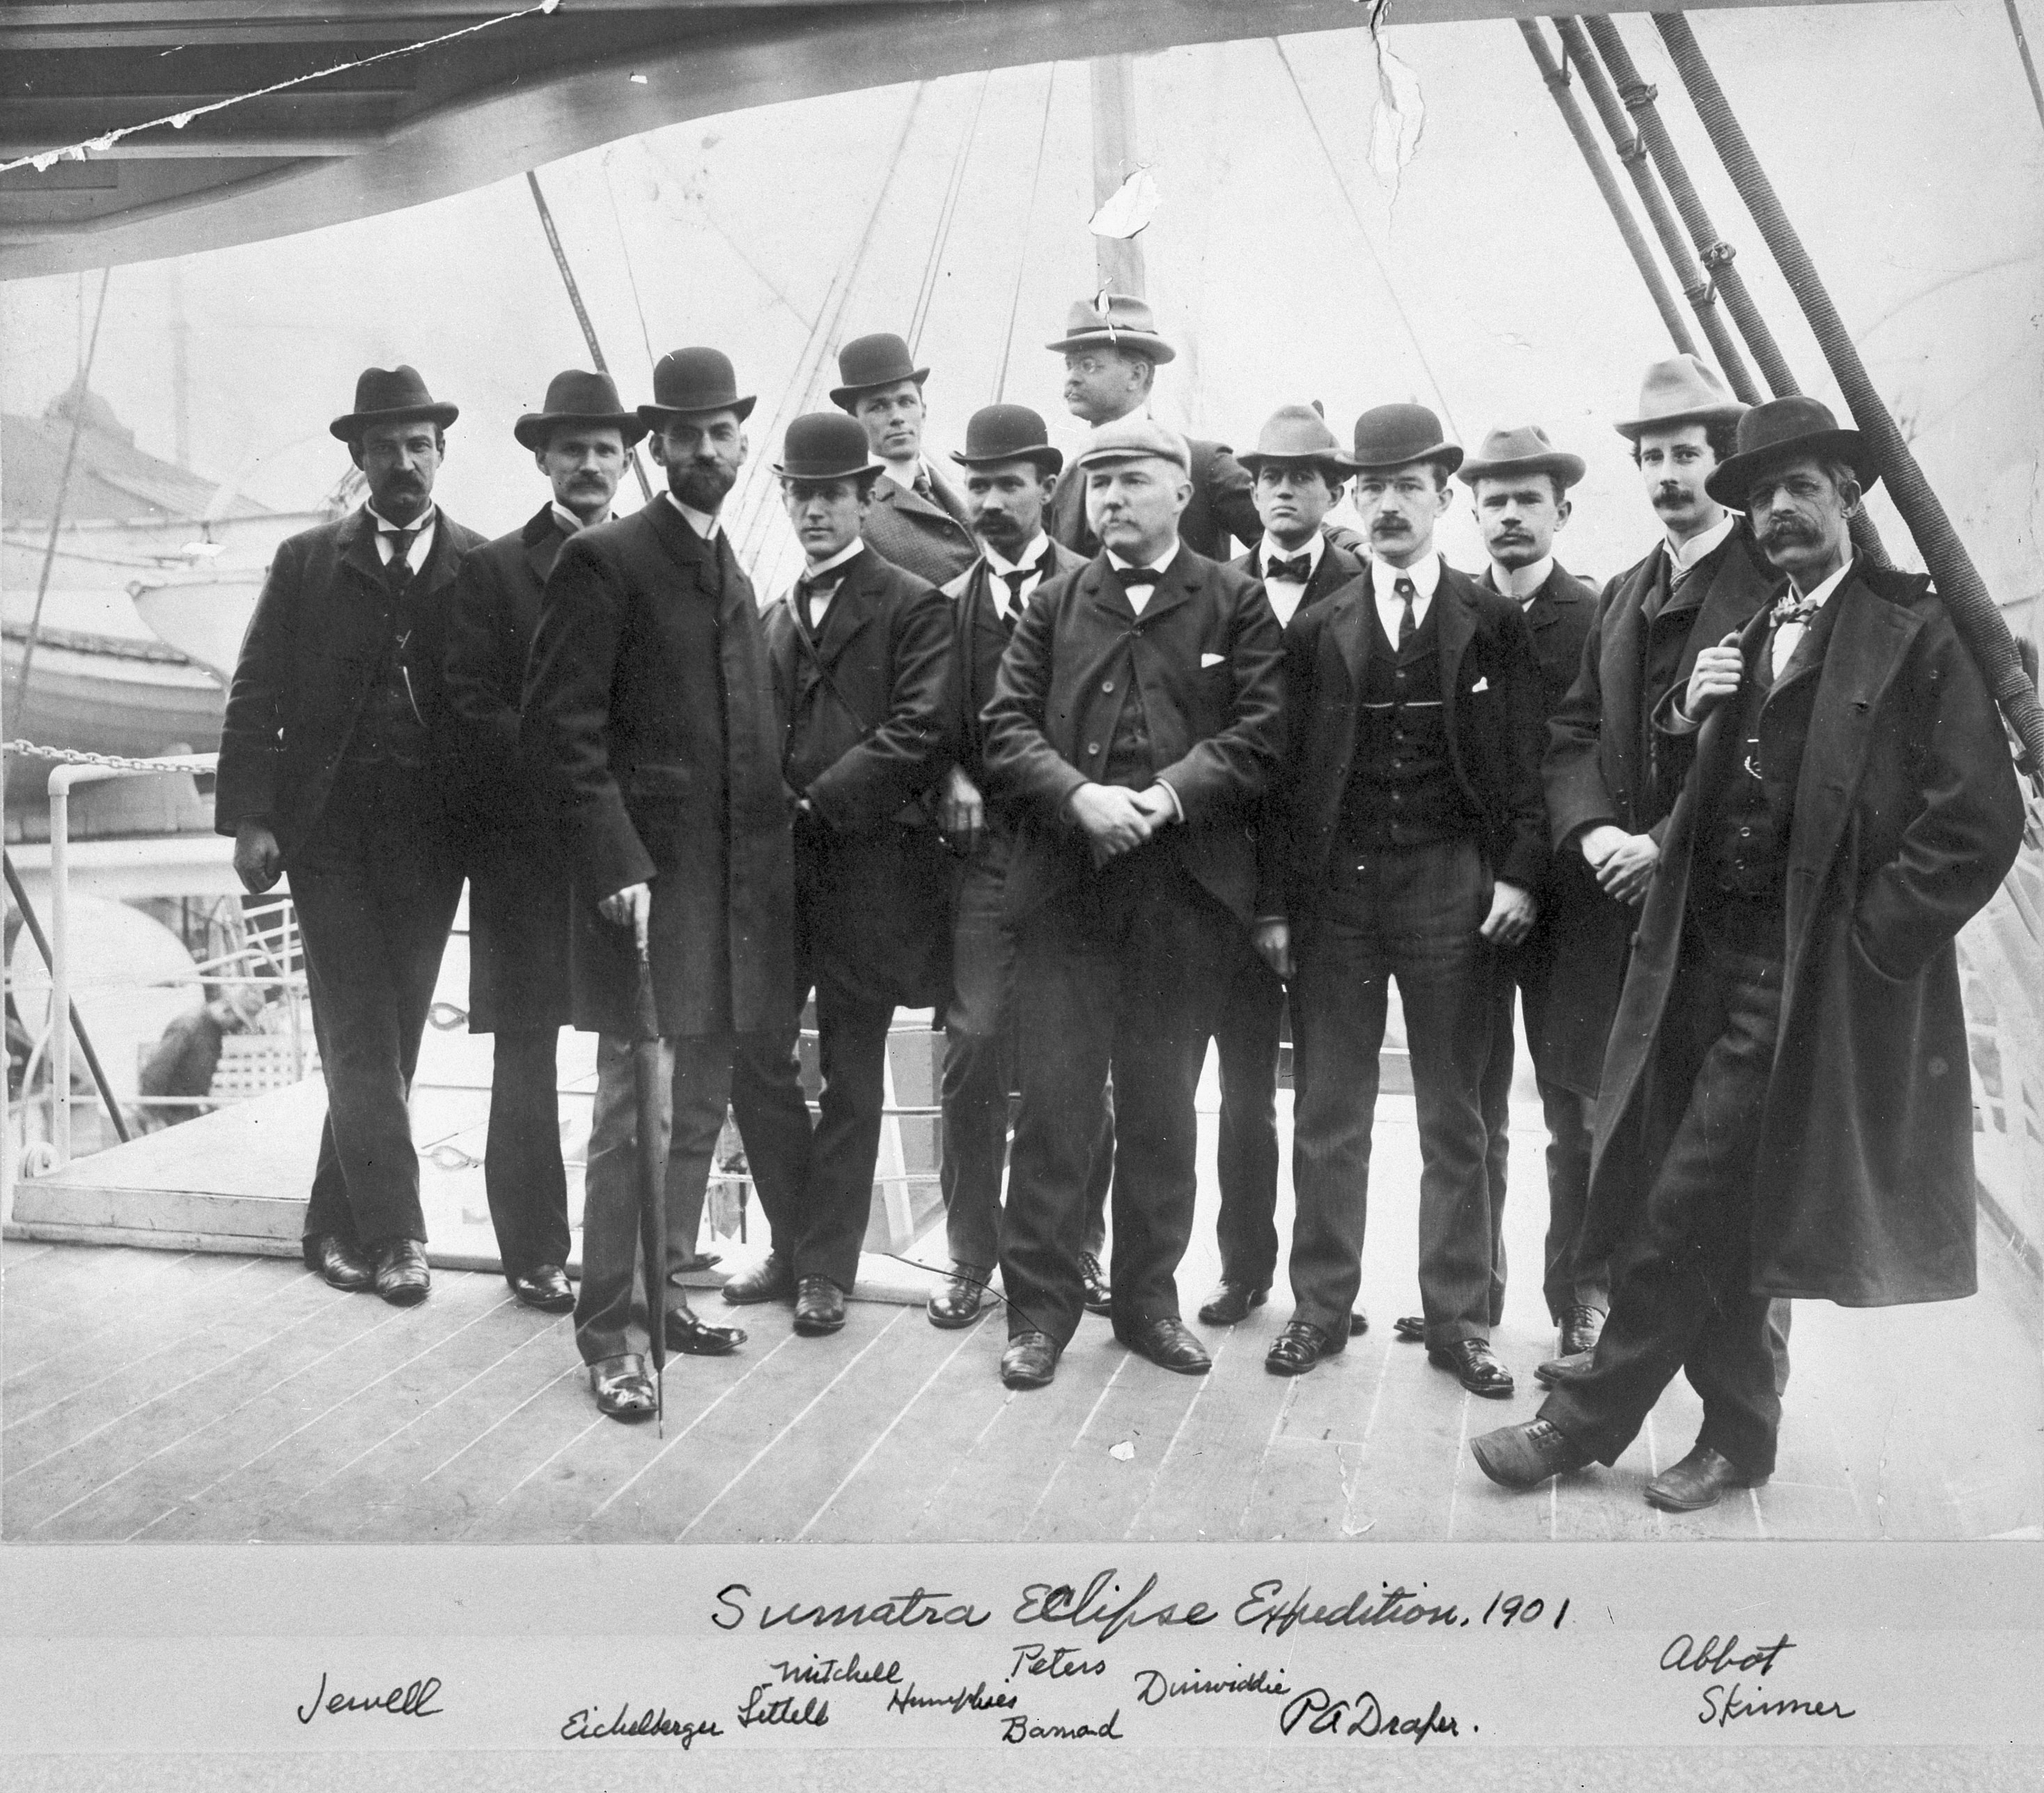 Members of the SAO's Sumatra Eclipse Expedition in 1901 pose for a photo on a deck of a ship in harbor, all wearing suits, ties, and hats.